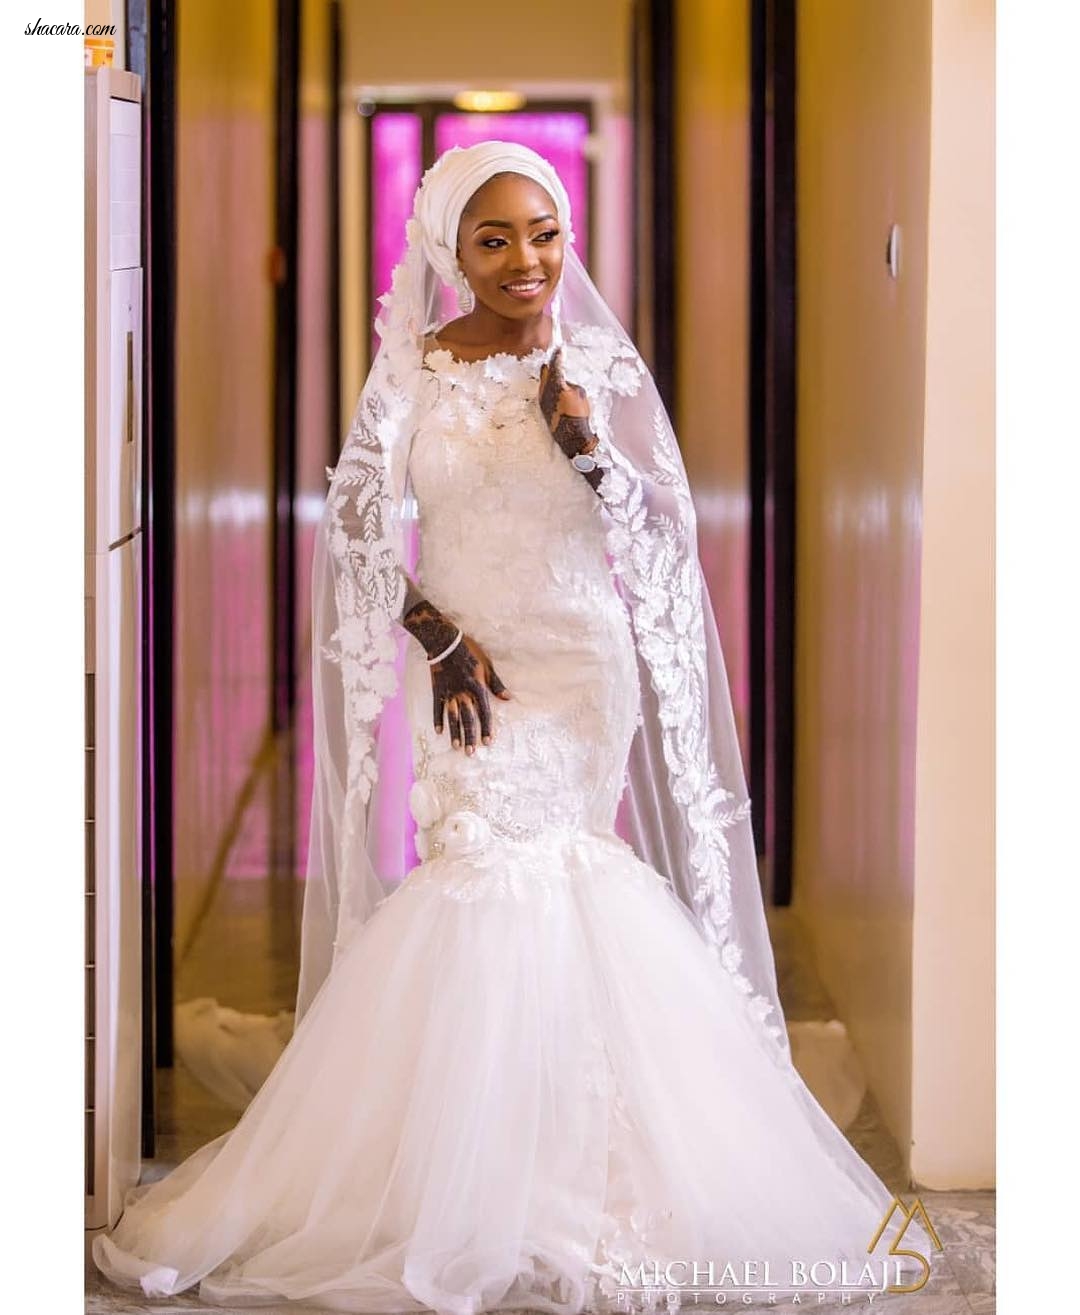 HERE ARE 10 EYE POOPING WEDDING DRESSES MUSLIM BRIDES ARE SLAYING FOR THEIR NIKKIA.